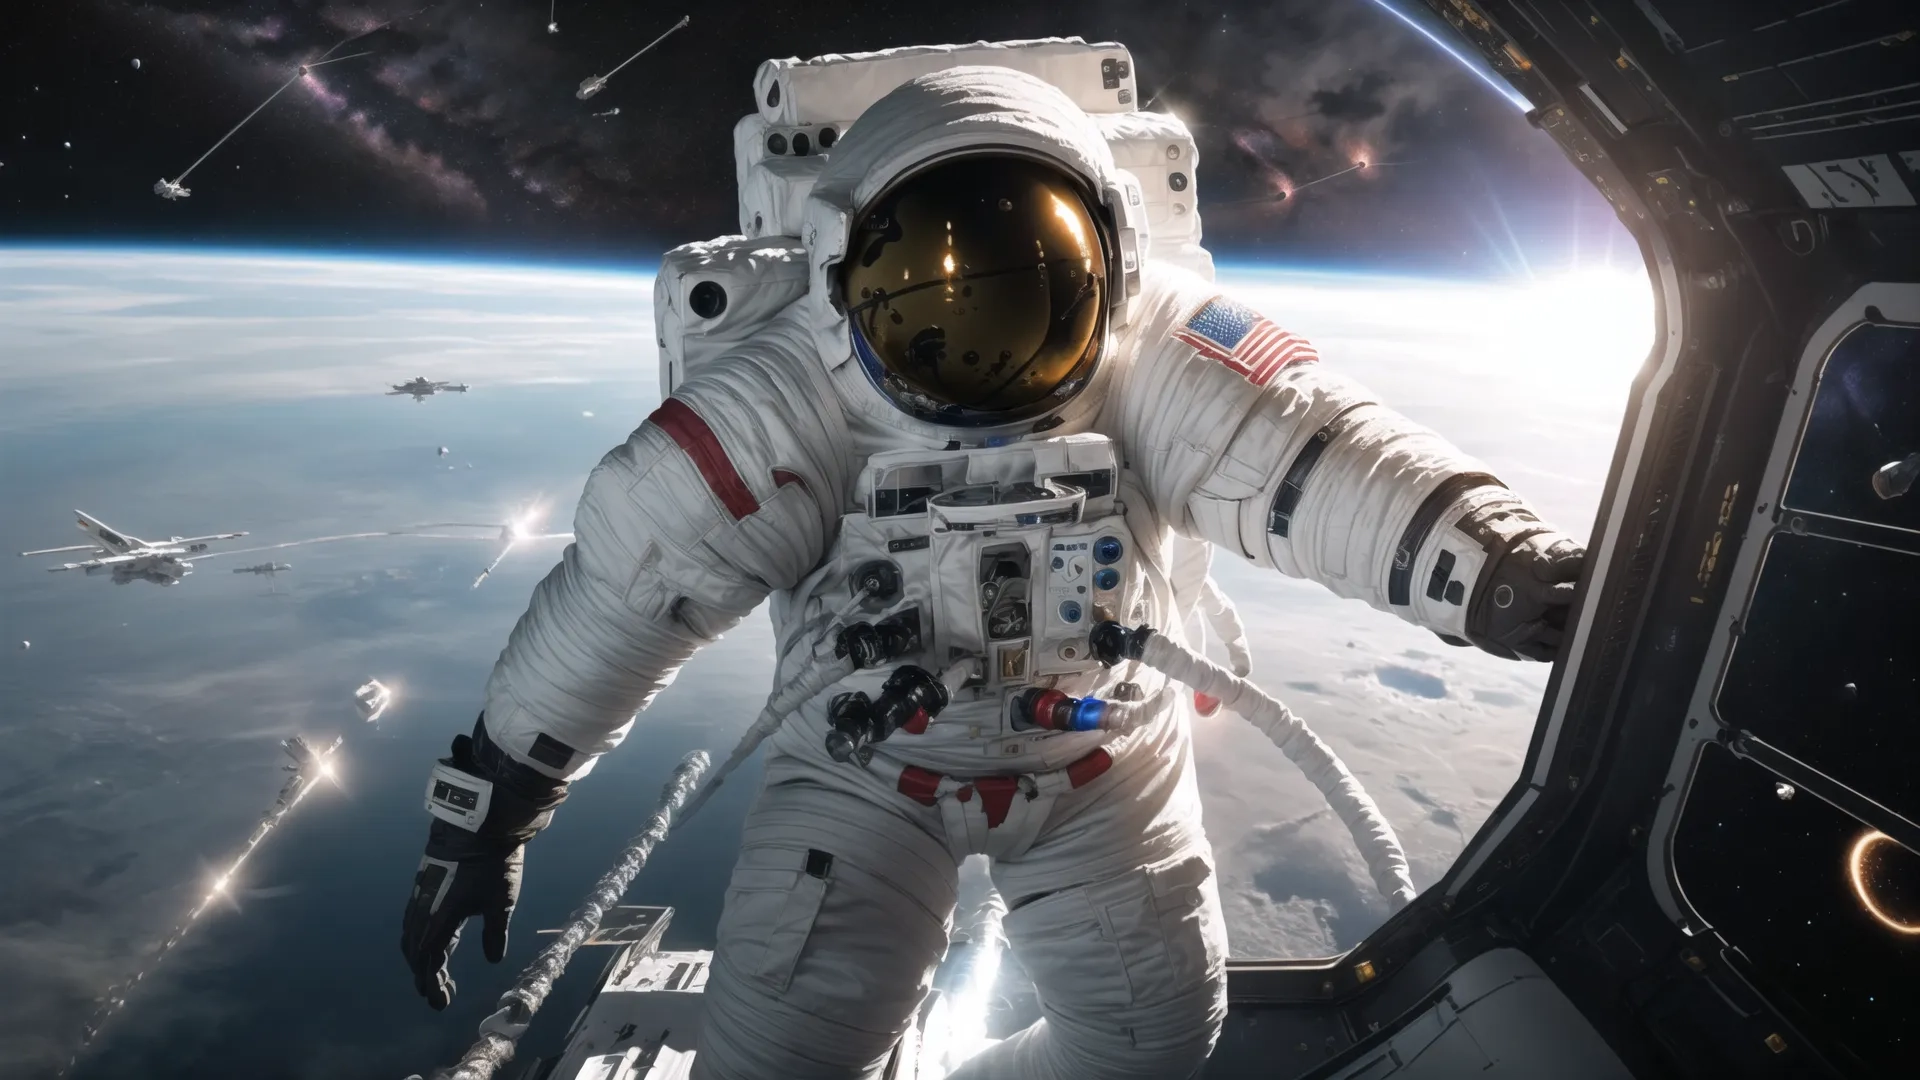 astronaut in space suit looking out window with planets in the distance in the background above earth, astronaut in spacesuit as seen from the port of space ship
